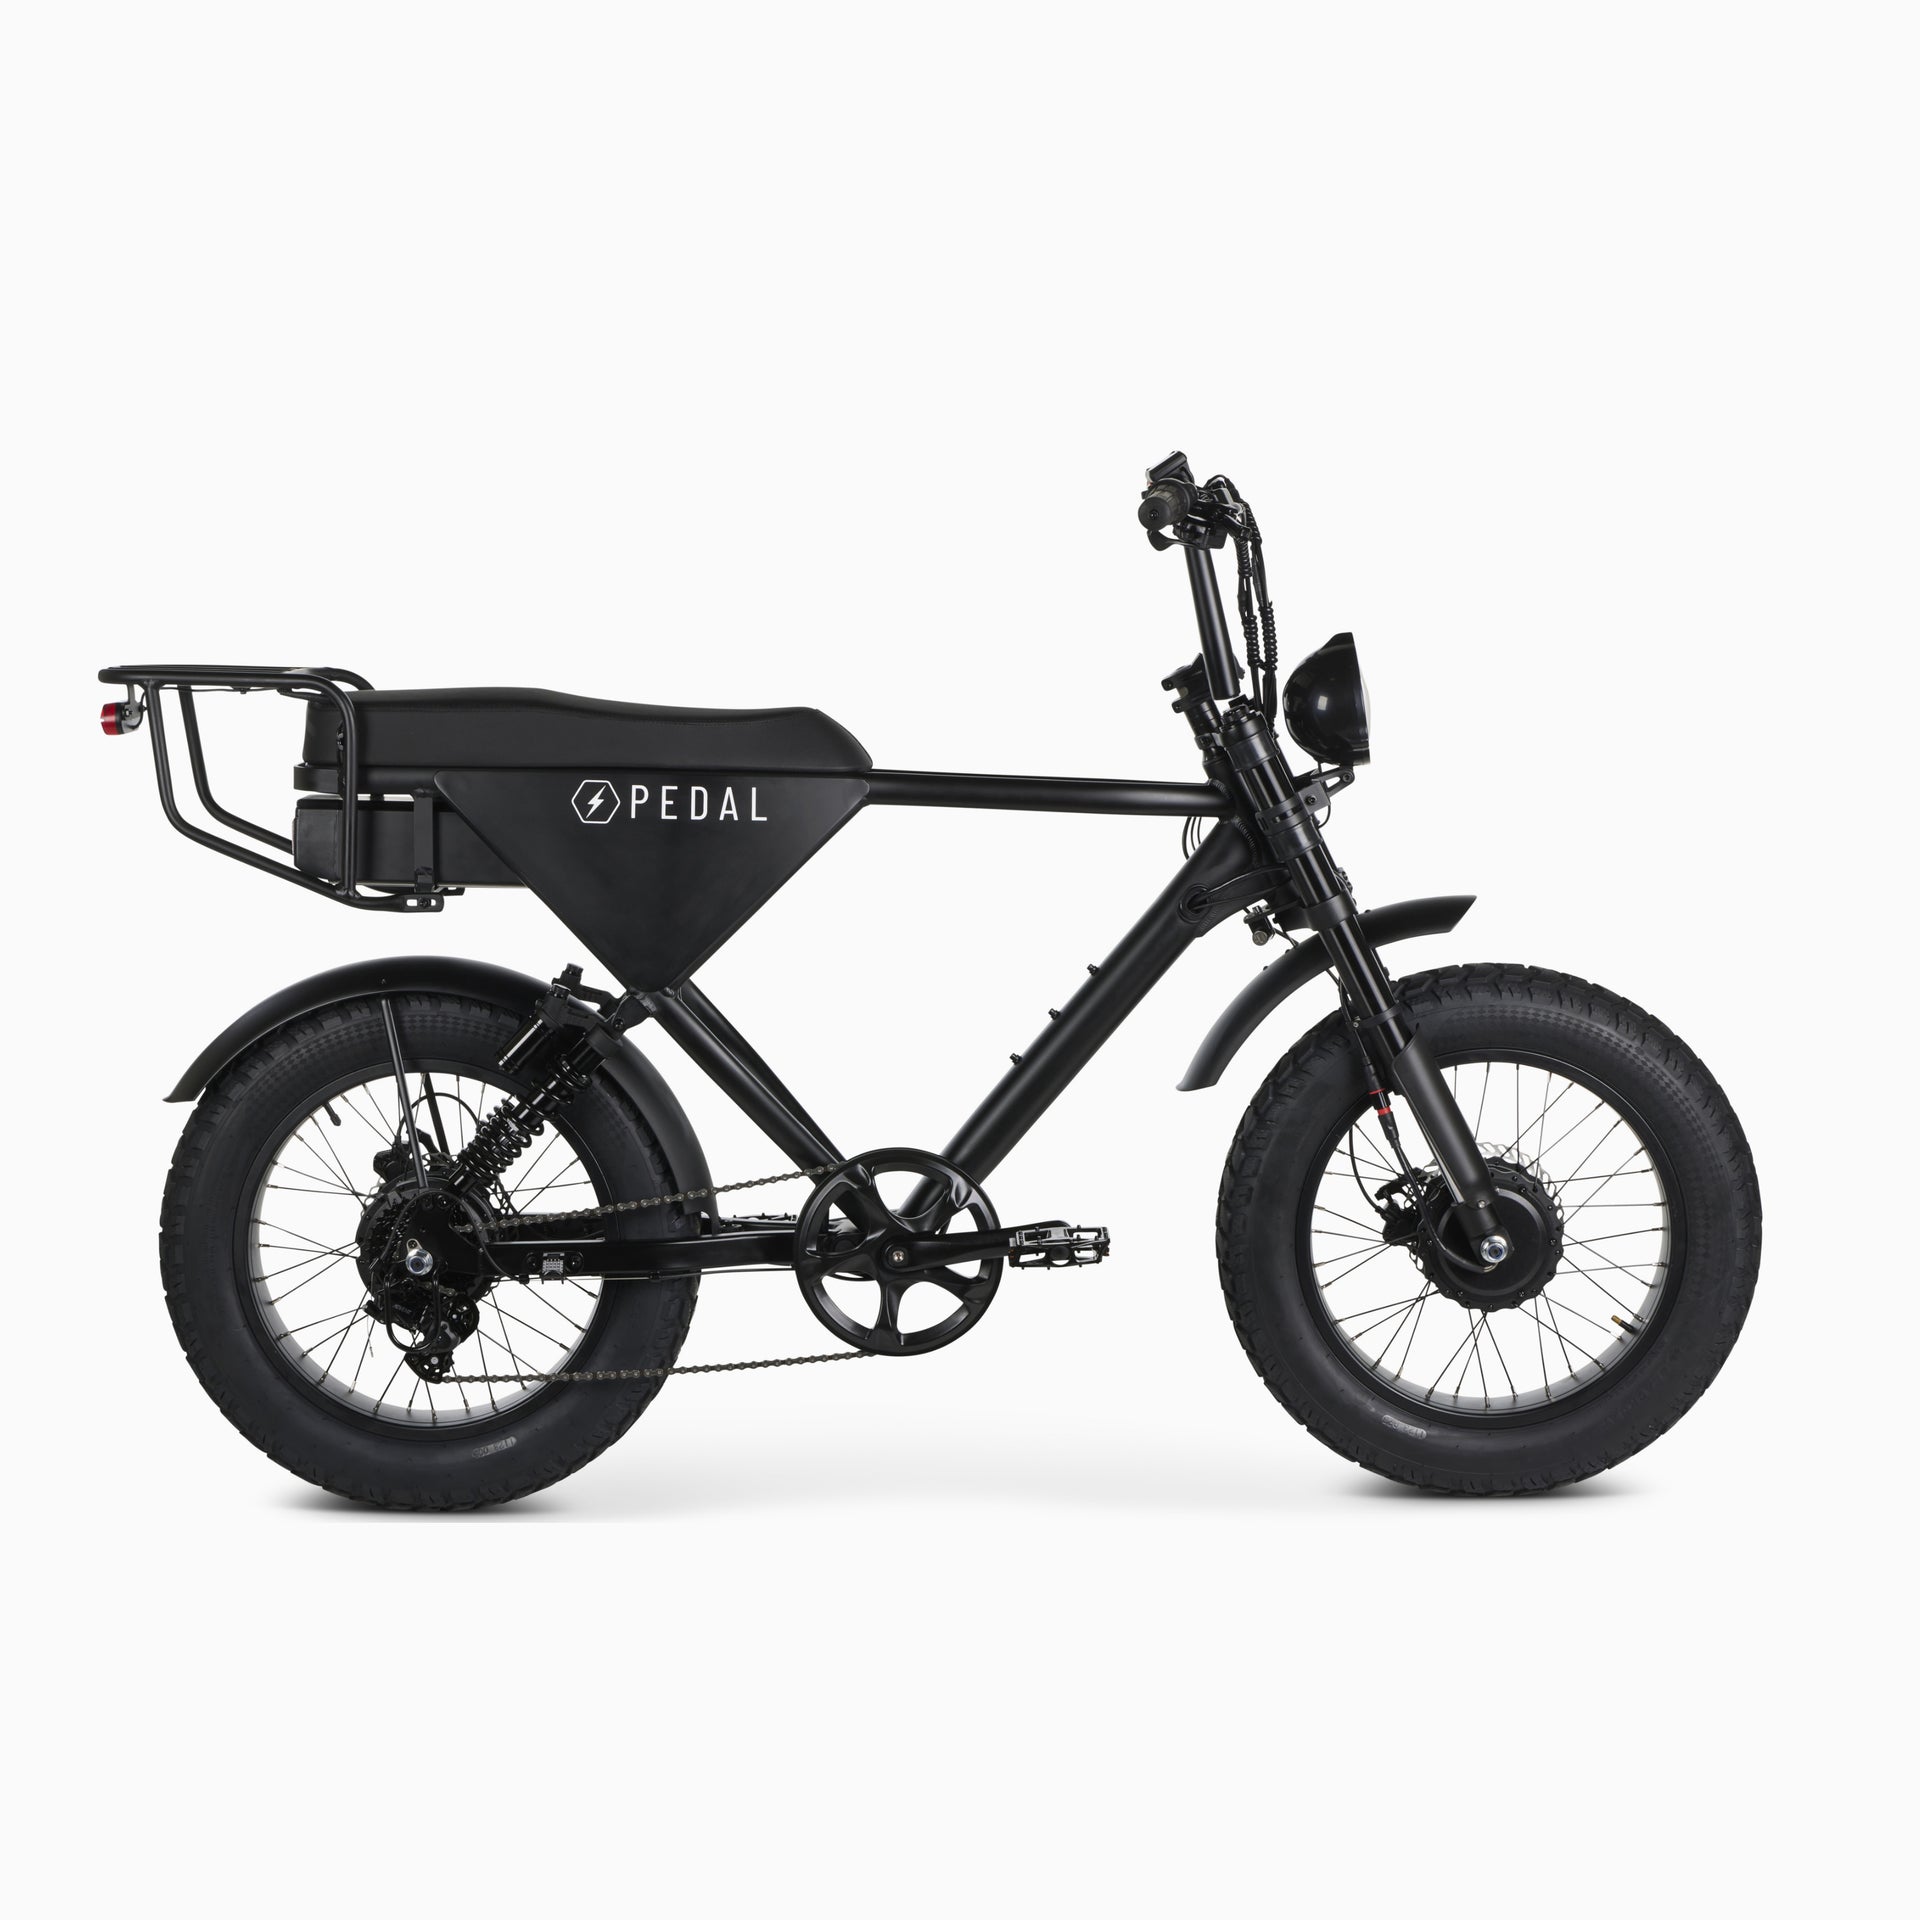 This Electric Motocross Bike Is Built For Experts and Joyriders Alike